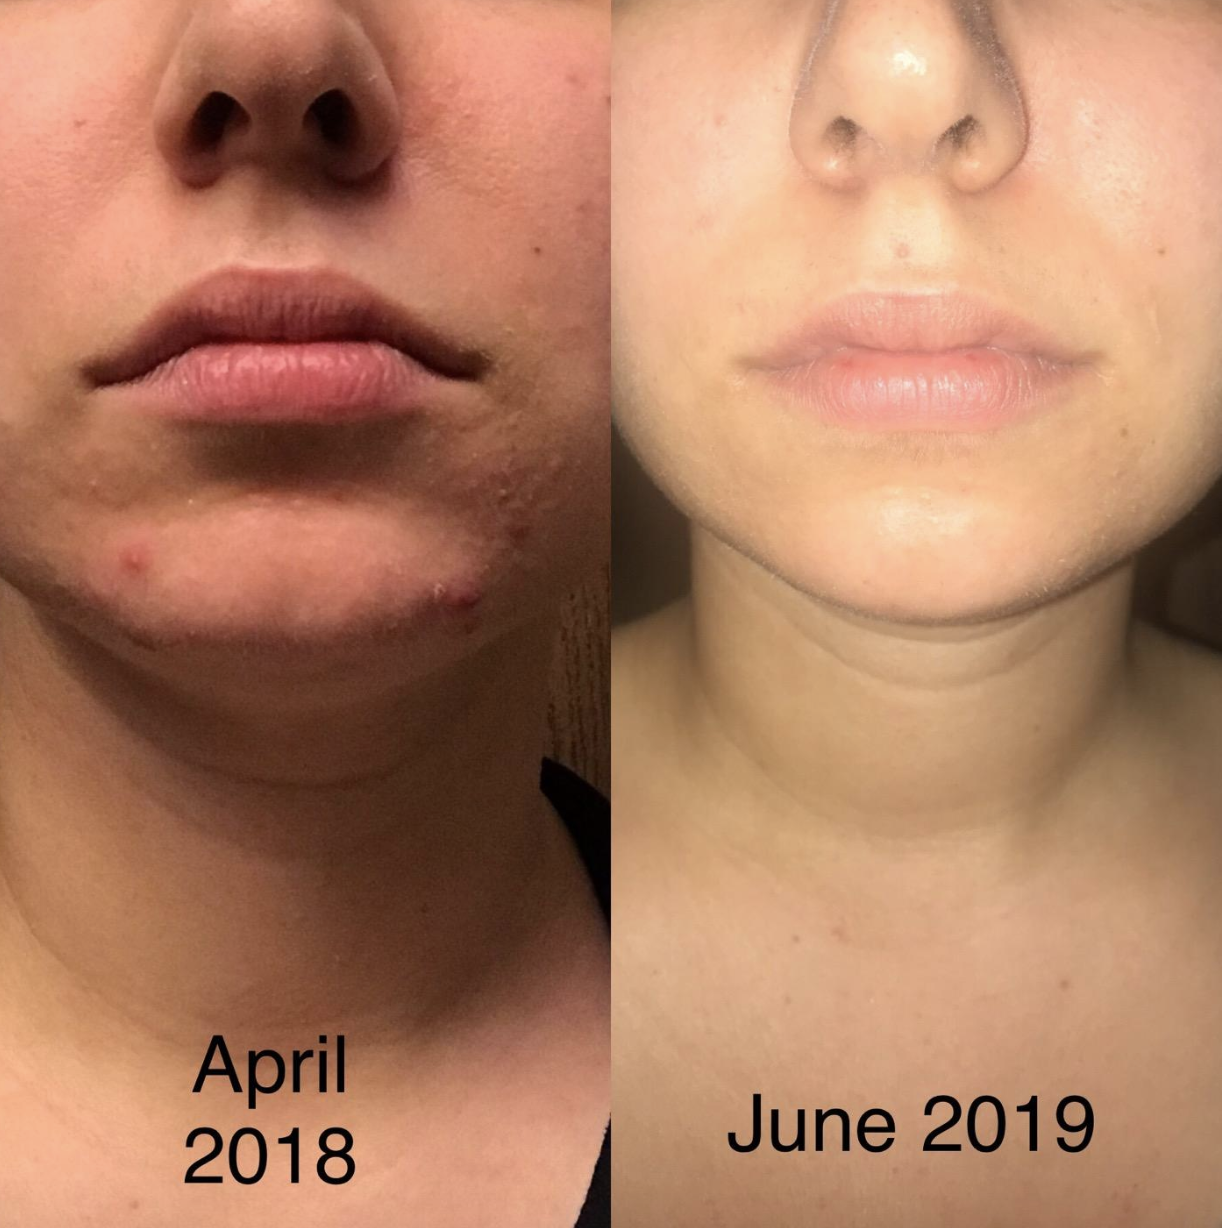 on the left a person with moderate acne across their chin labeled &quot;April 2018&quot; and on the right the same person with significantly less acne labeled &quot;June 2019&quot; 